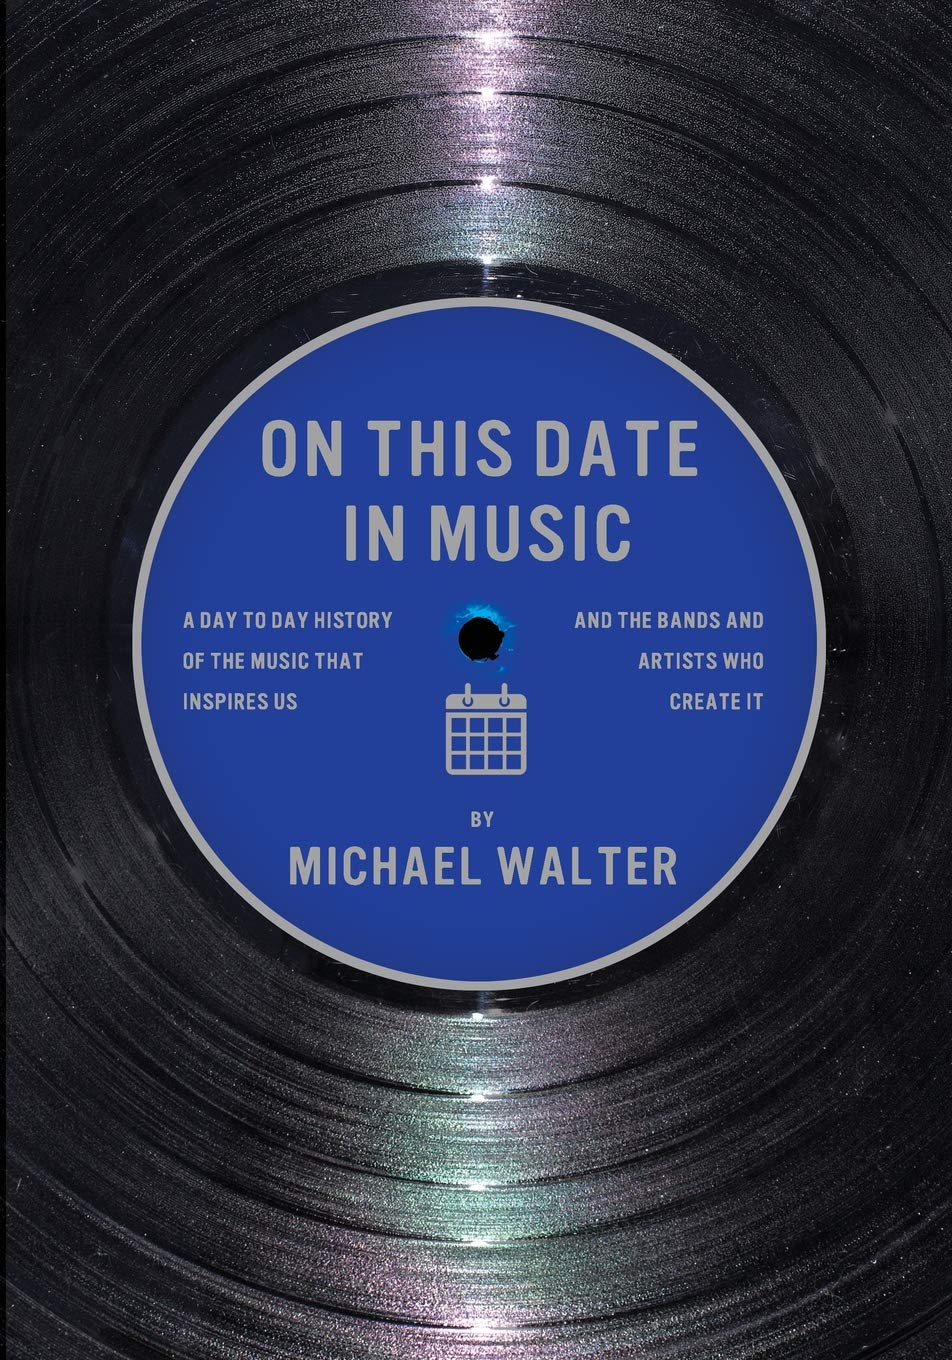 On This Date In Music: A Day to Day History of the Music that Inspires Us and the Artists Who Create It - Mike Walter